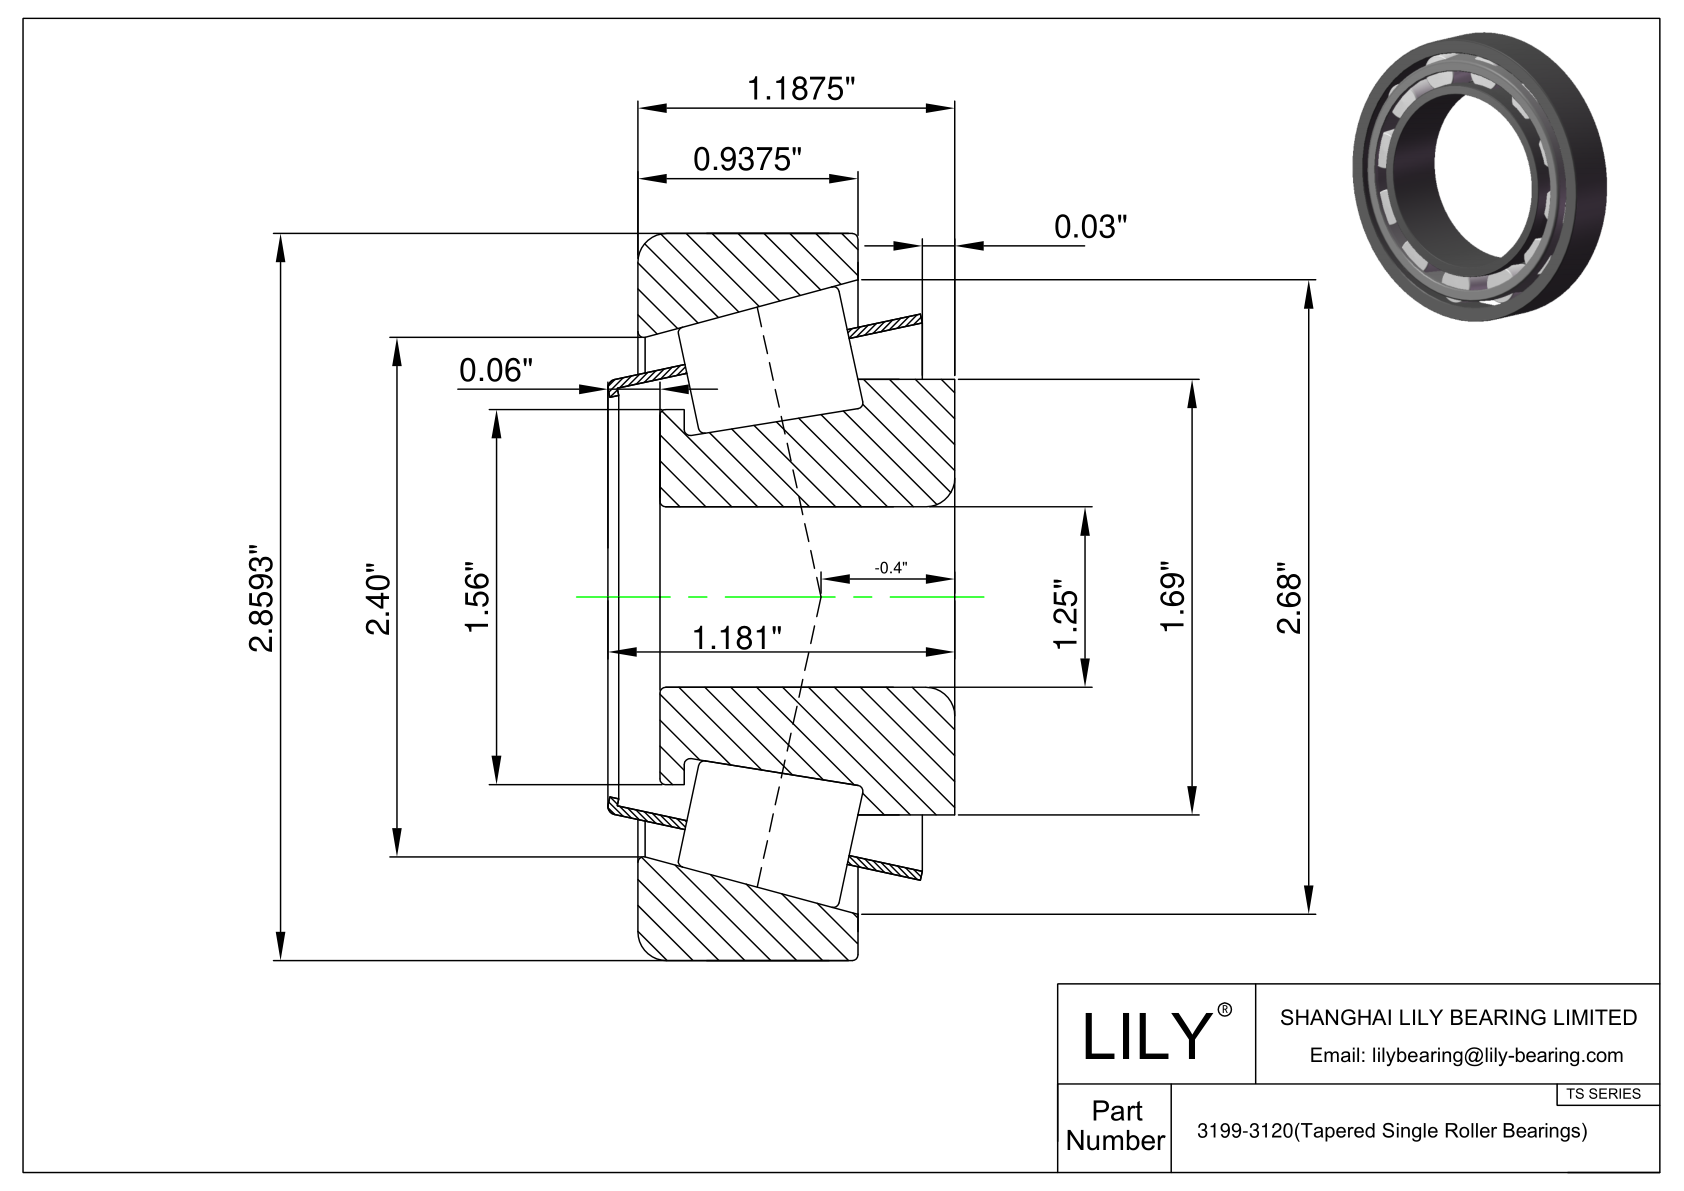 3199-3120 TS (Tapered Single Roller Bearings) (Imperial) cad drawing